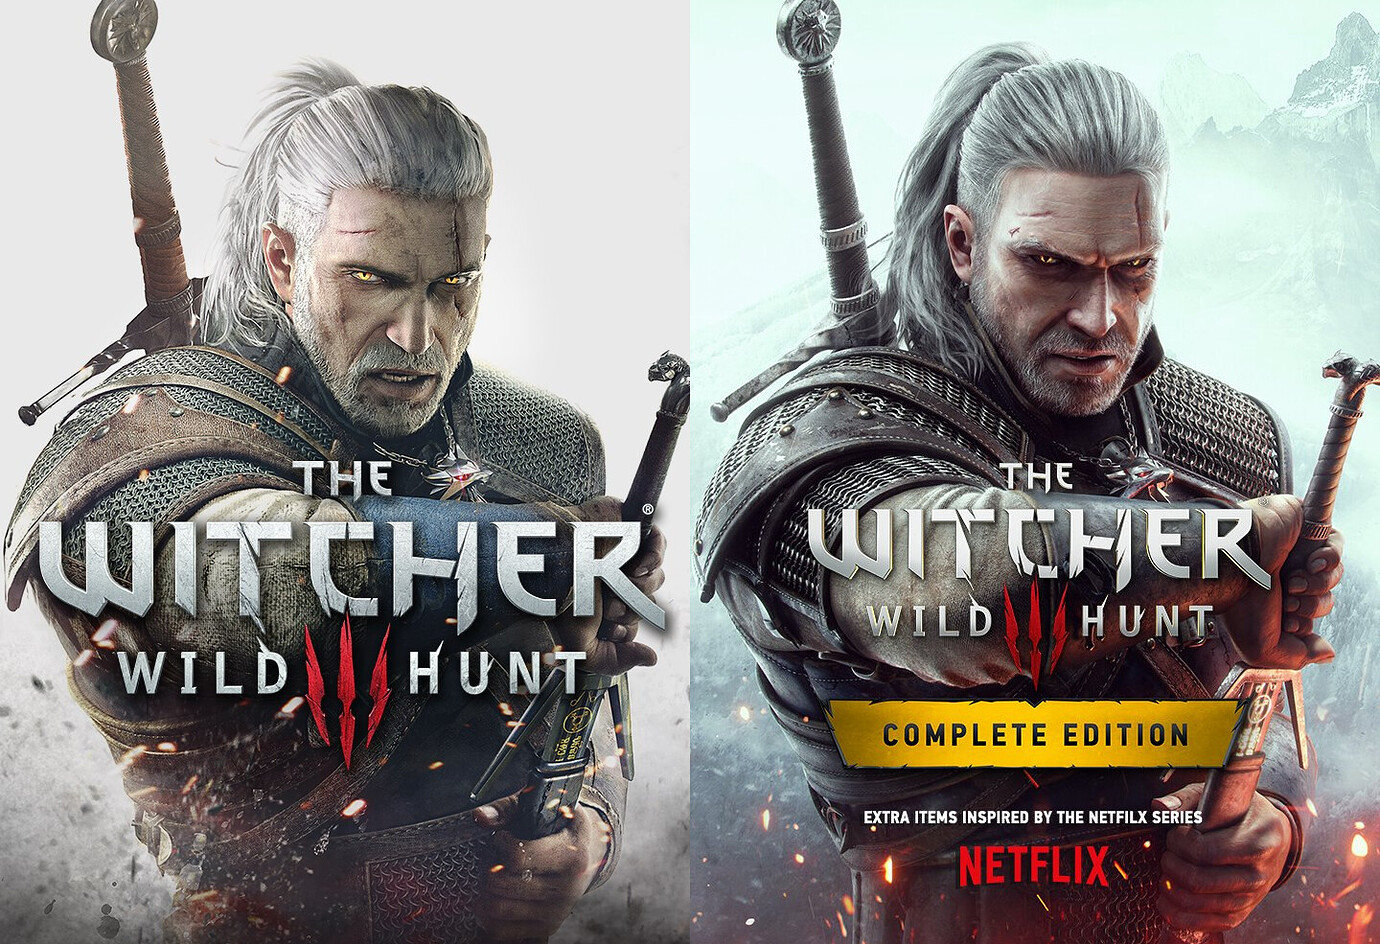 The Witcher 3's updated cover art reveals a new look for Geralt and